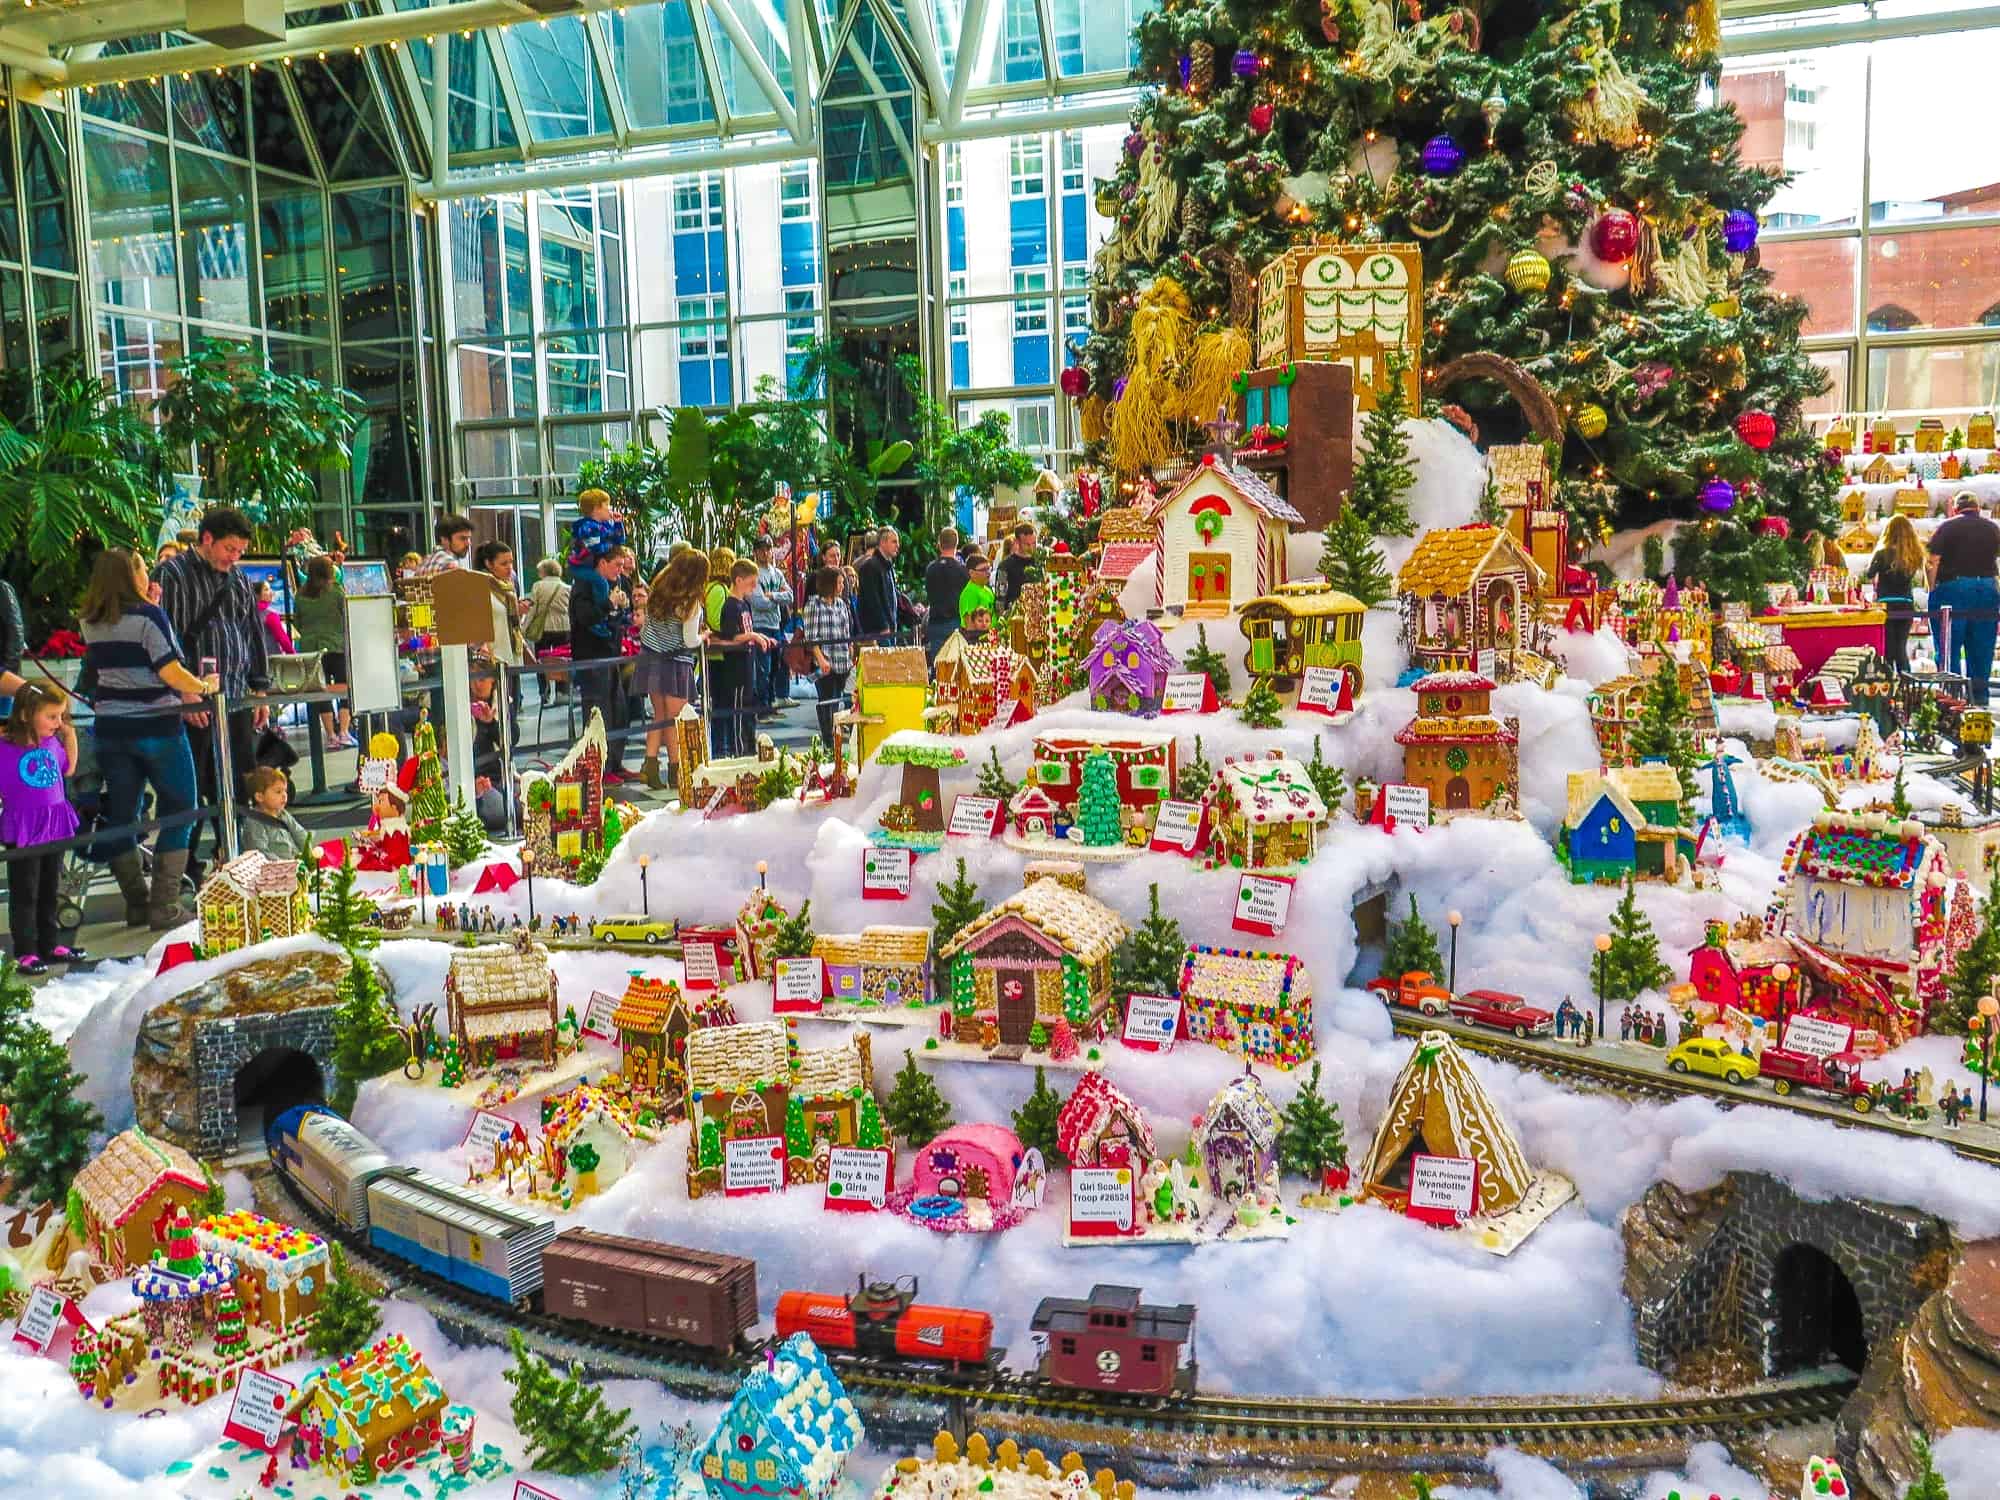 The Best Pittsburgh Christmas Events for Families in 2022